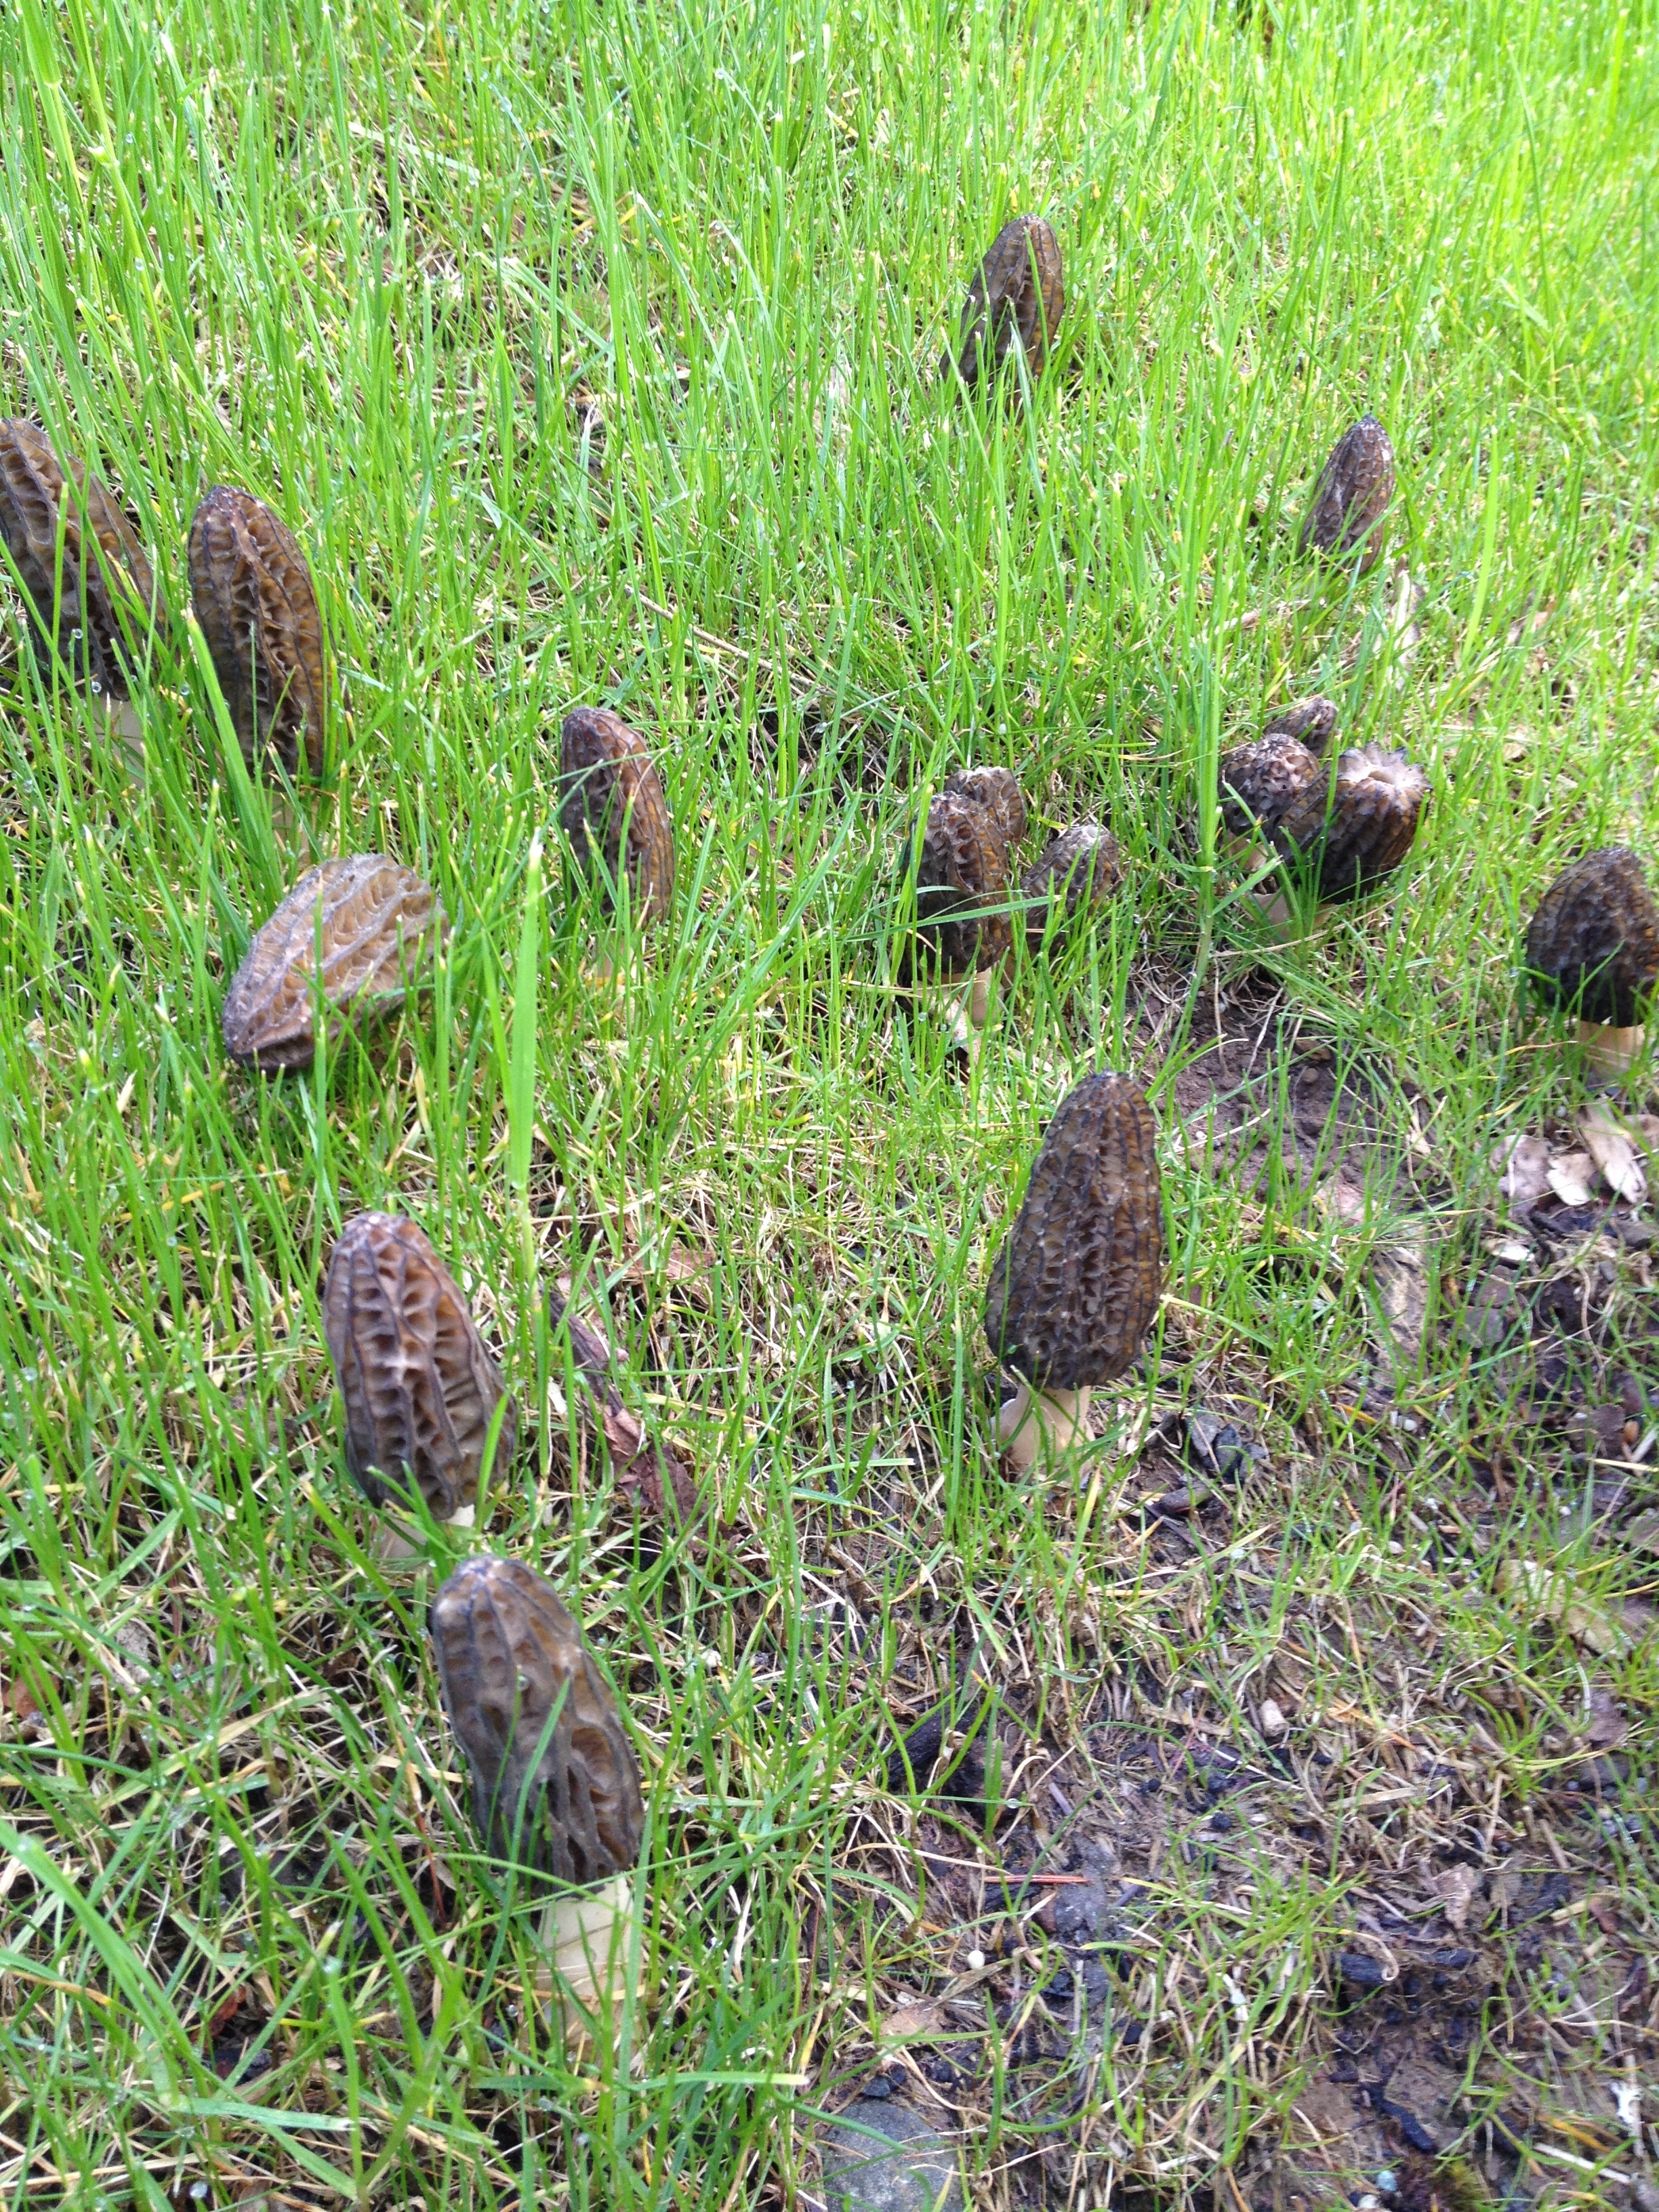 A group of mushrooms in the grass.